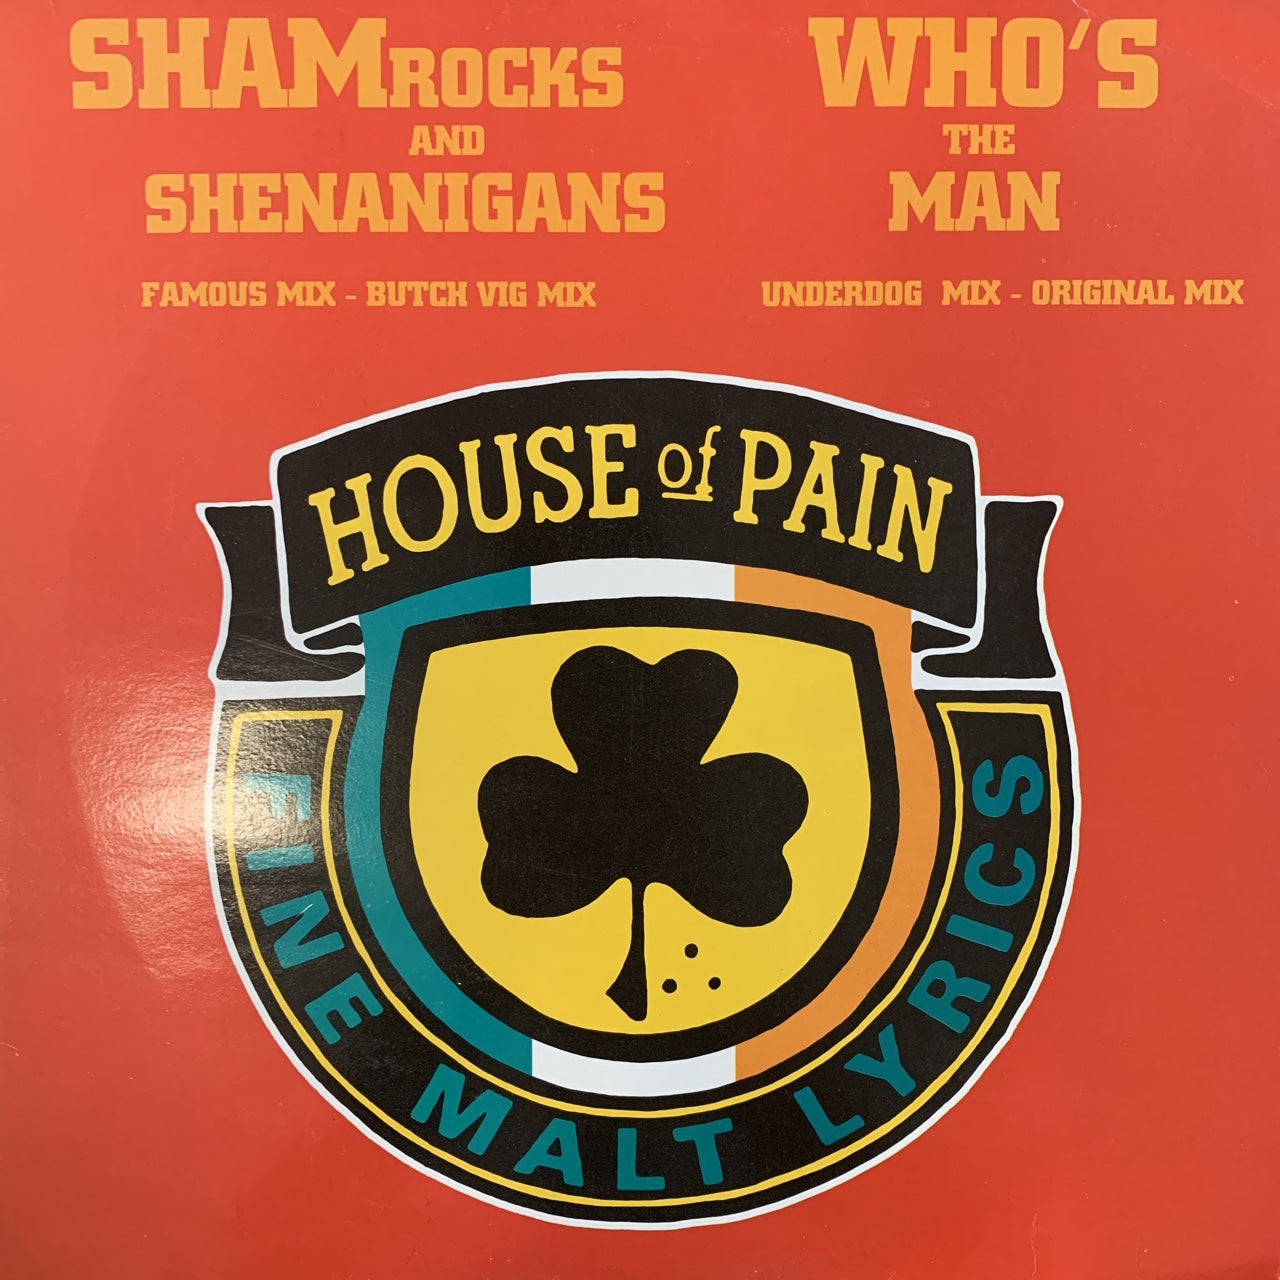 House of Pain “Shamrocks and Shenanigans” / “Who’s the Man” 4 Version 12inch Vinyl